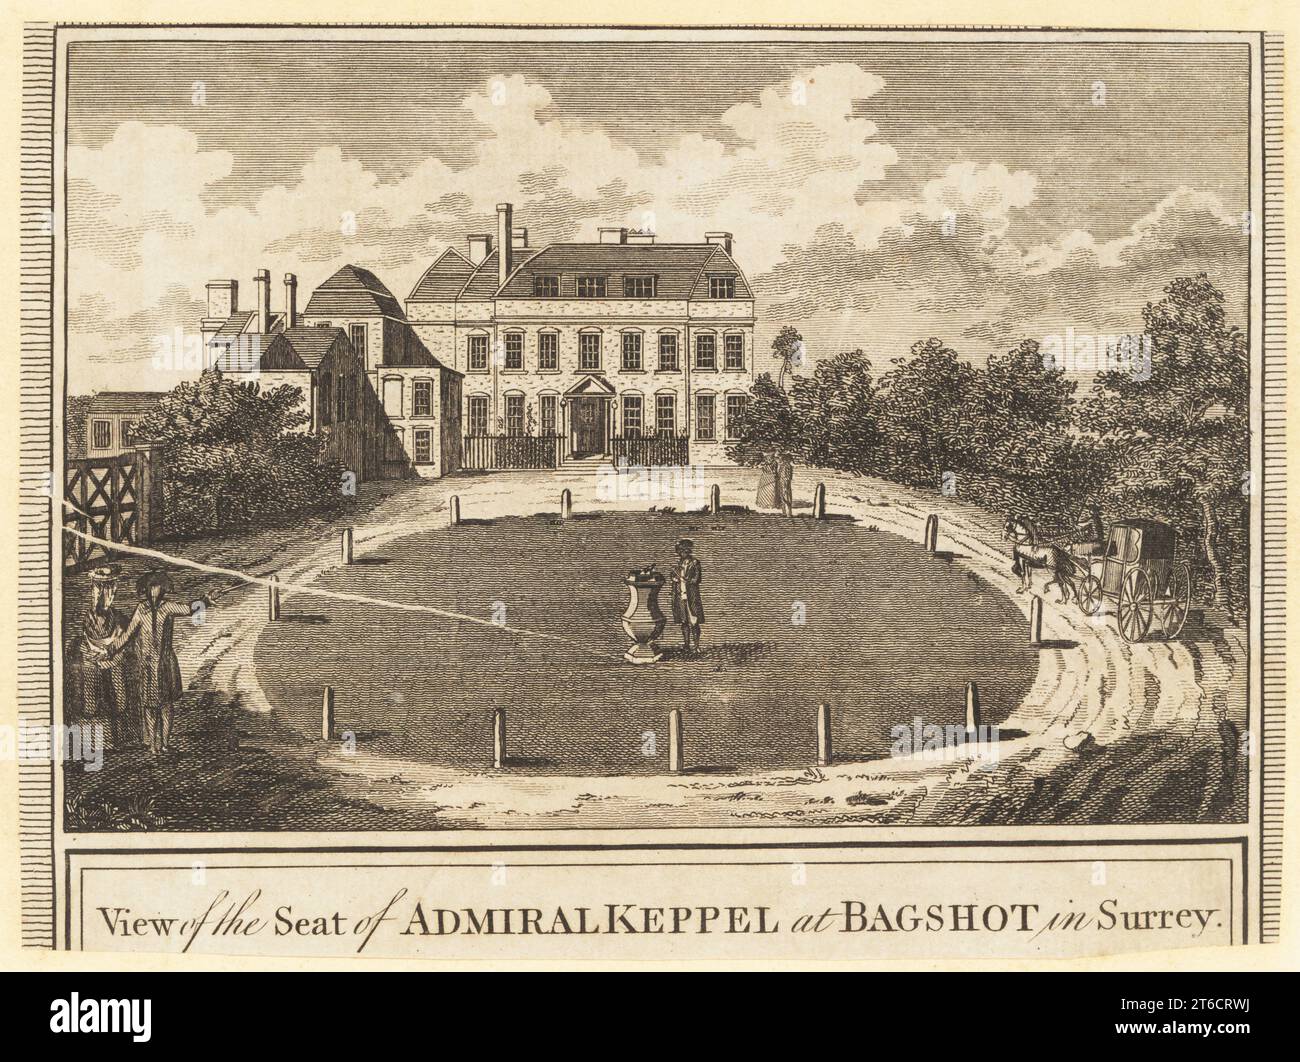 View of Bagshot Lodge, Surrey. Built in the 17th century by Inigo Jones, remodelled in the 1760s by architect James Paine for General George Keppel, Earl of Albemarle. A man stands next to a sundial in the garden. View of the seat of Admiral Keppel at Bagshot in Surrey. Copperplate engraving by Page from William Thorntons New History and Survey of London, published by Alexander Hogg at the Kings Arms, 16 Paternoster Row, London, 1784. Stock Photo